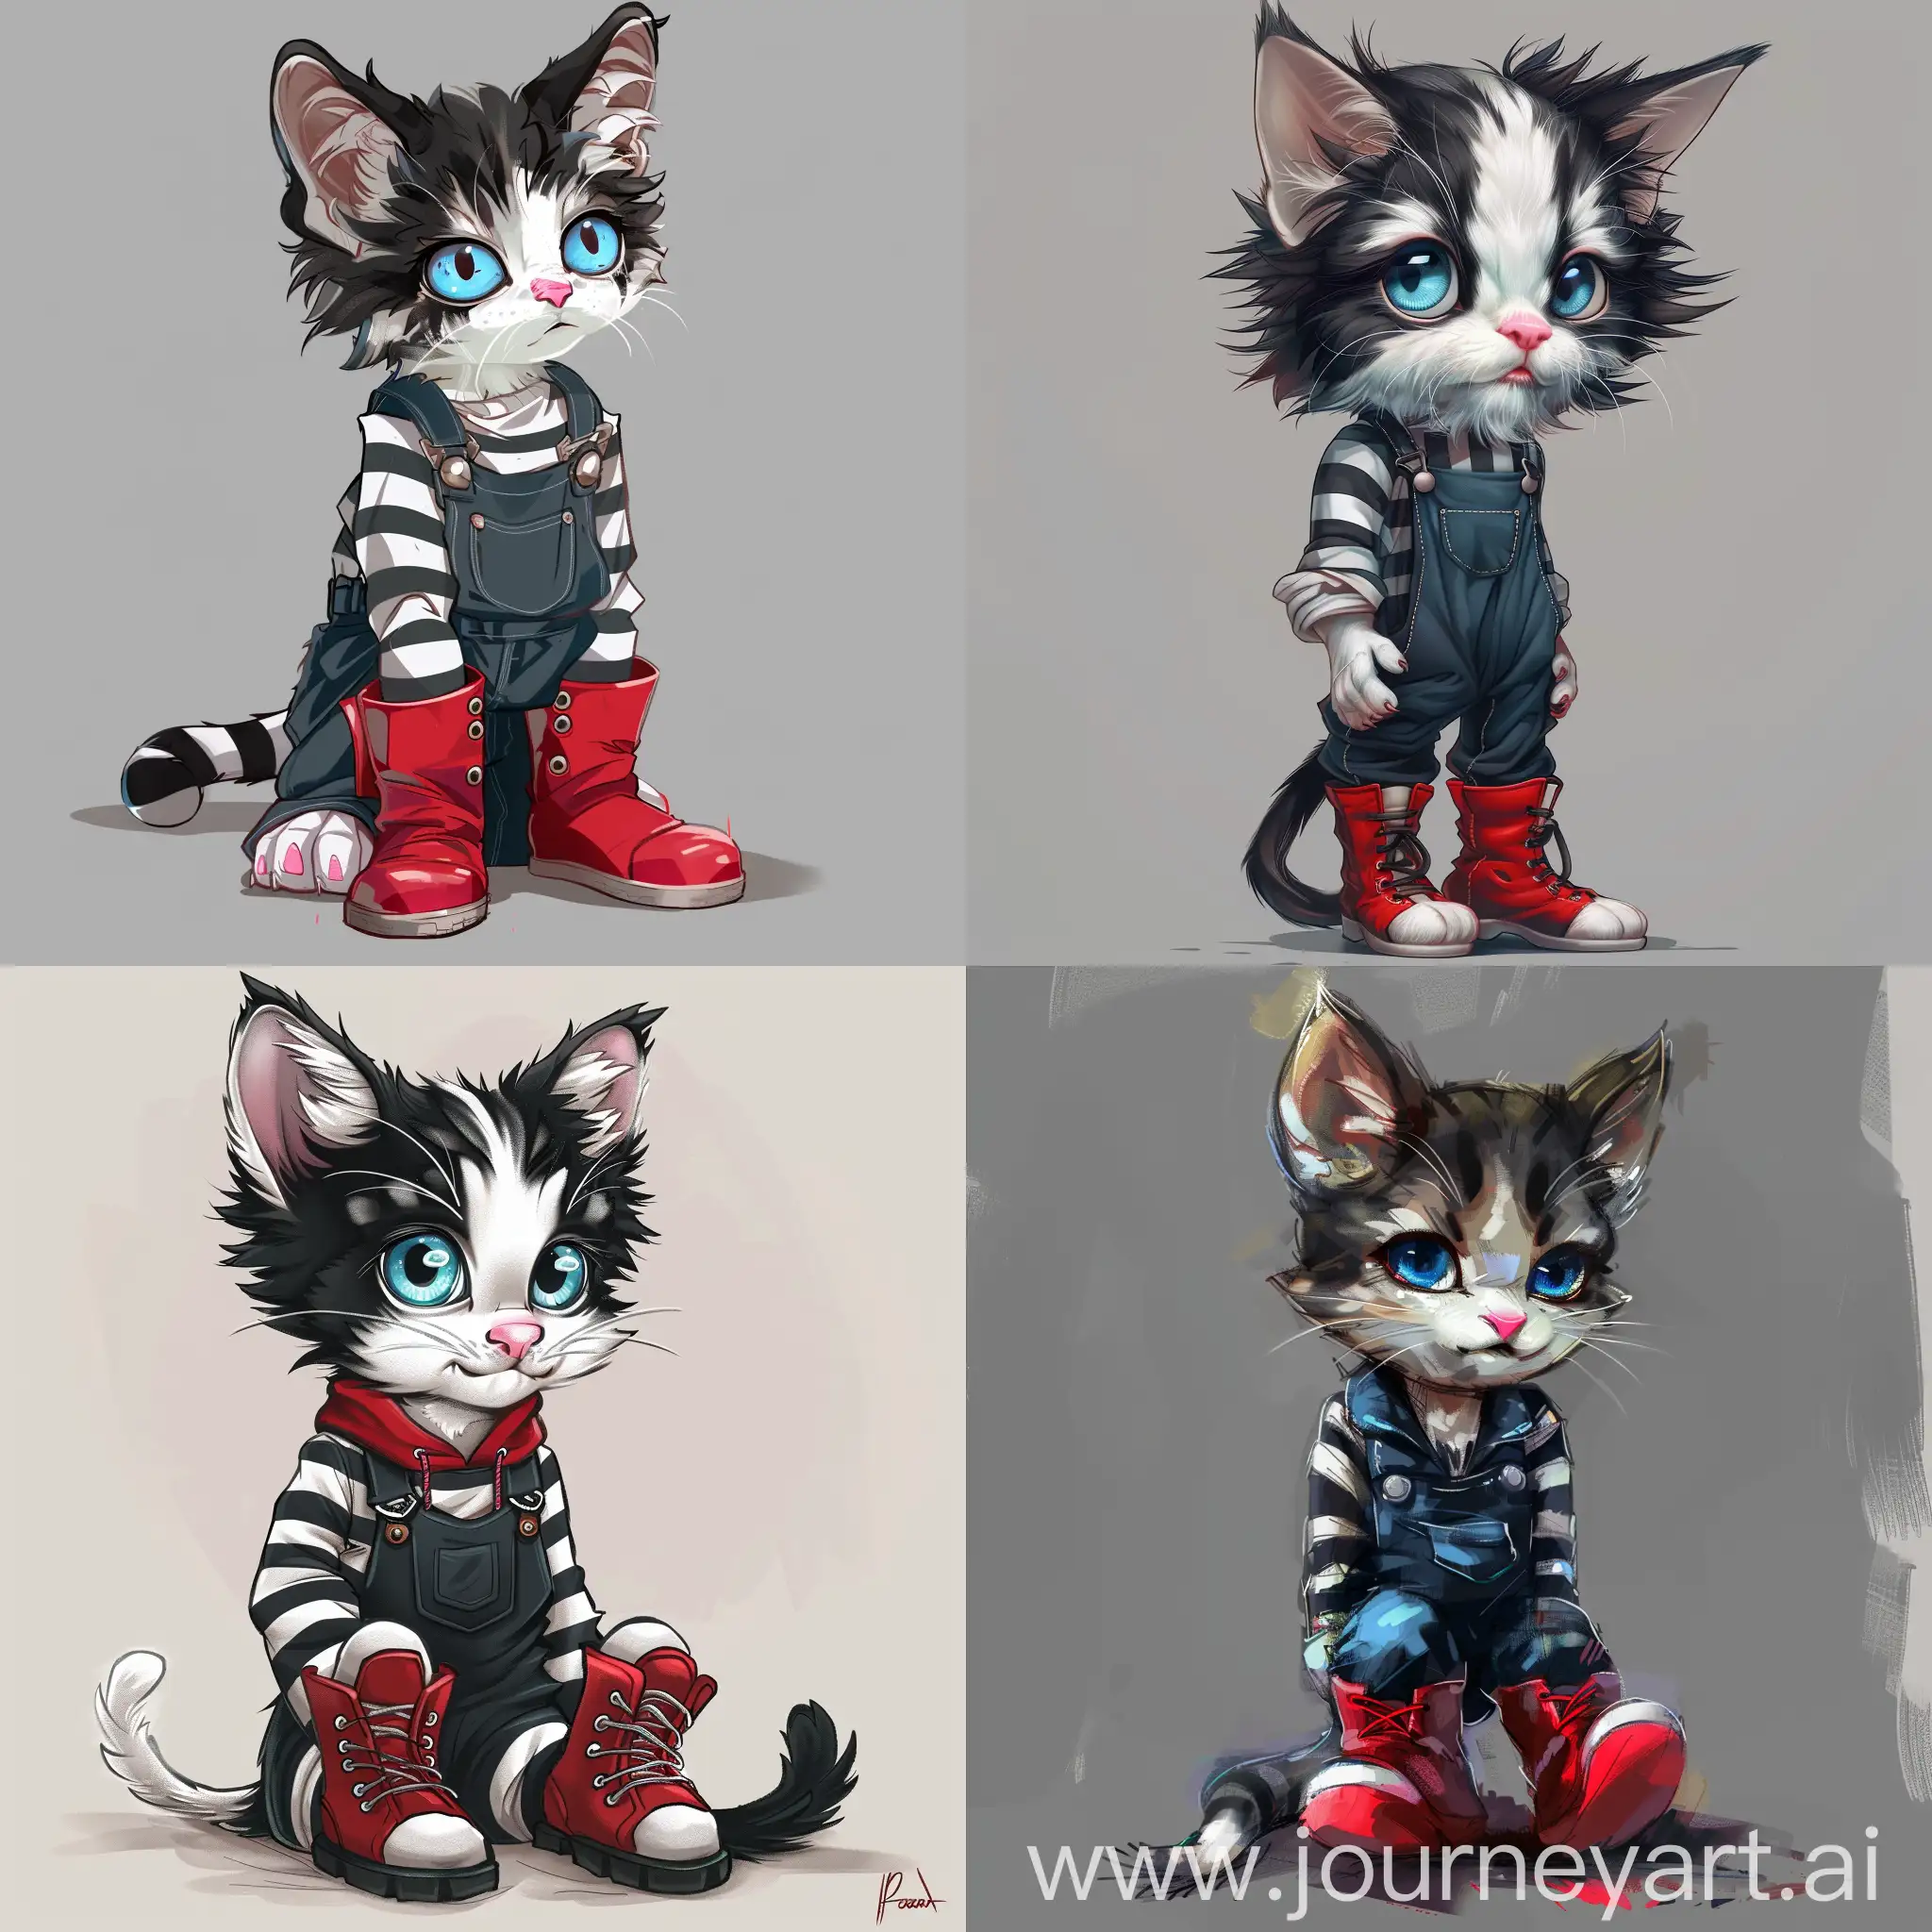 Black and white striped, cat, overalls, blue eyes, pink nose,Male, femboy, digital artwork, furry fandom character, red boots, reference draw